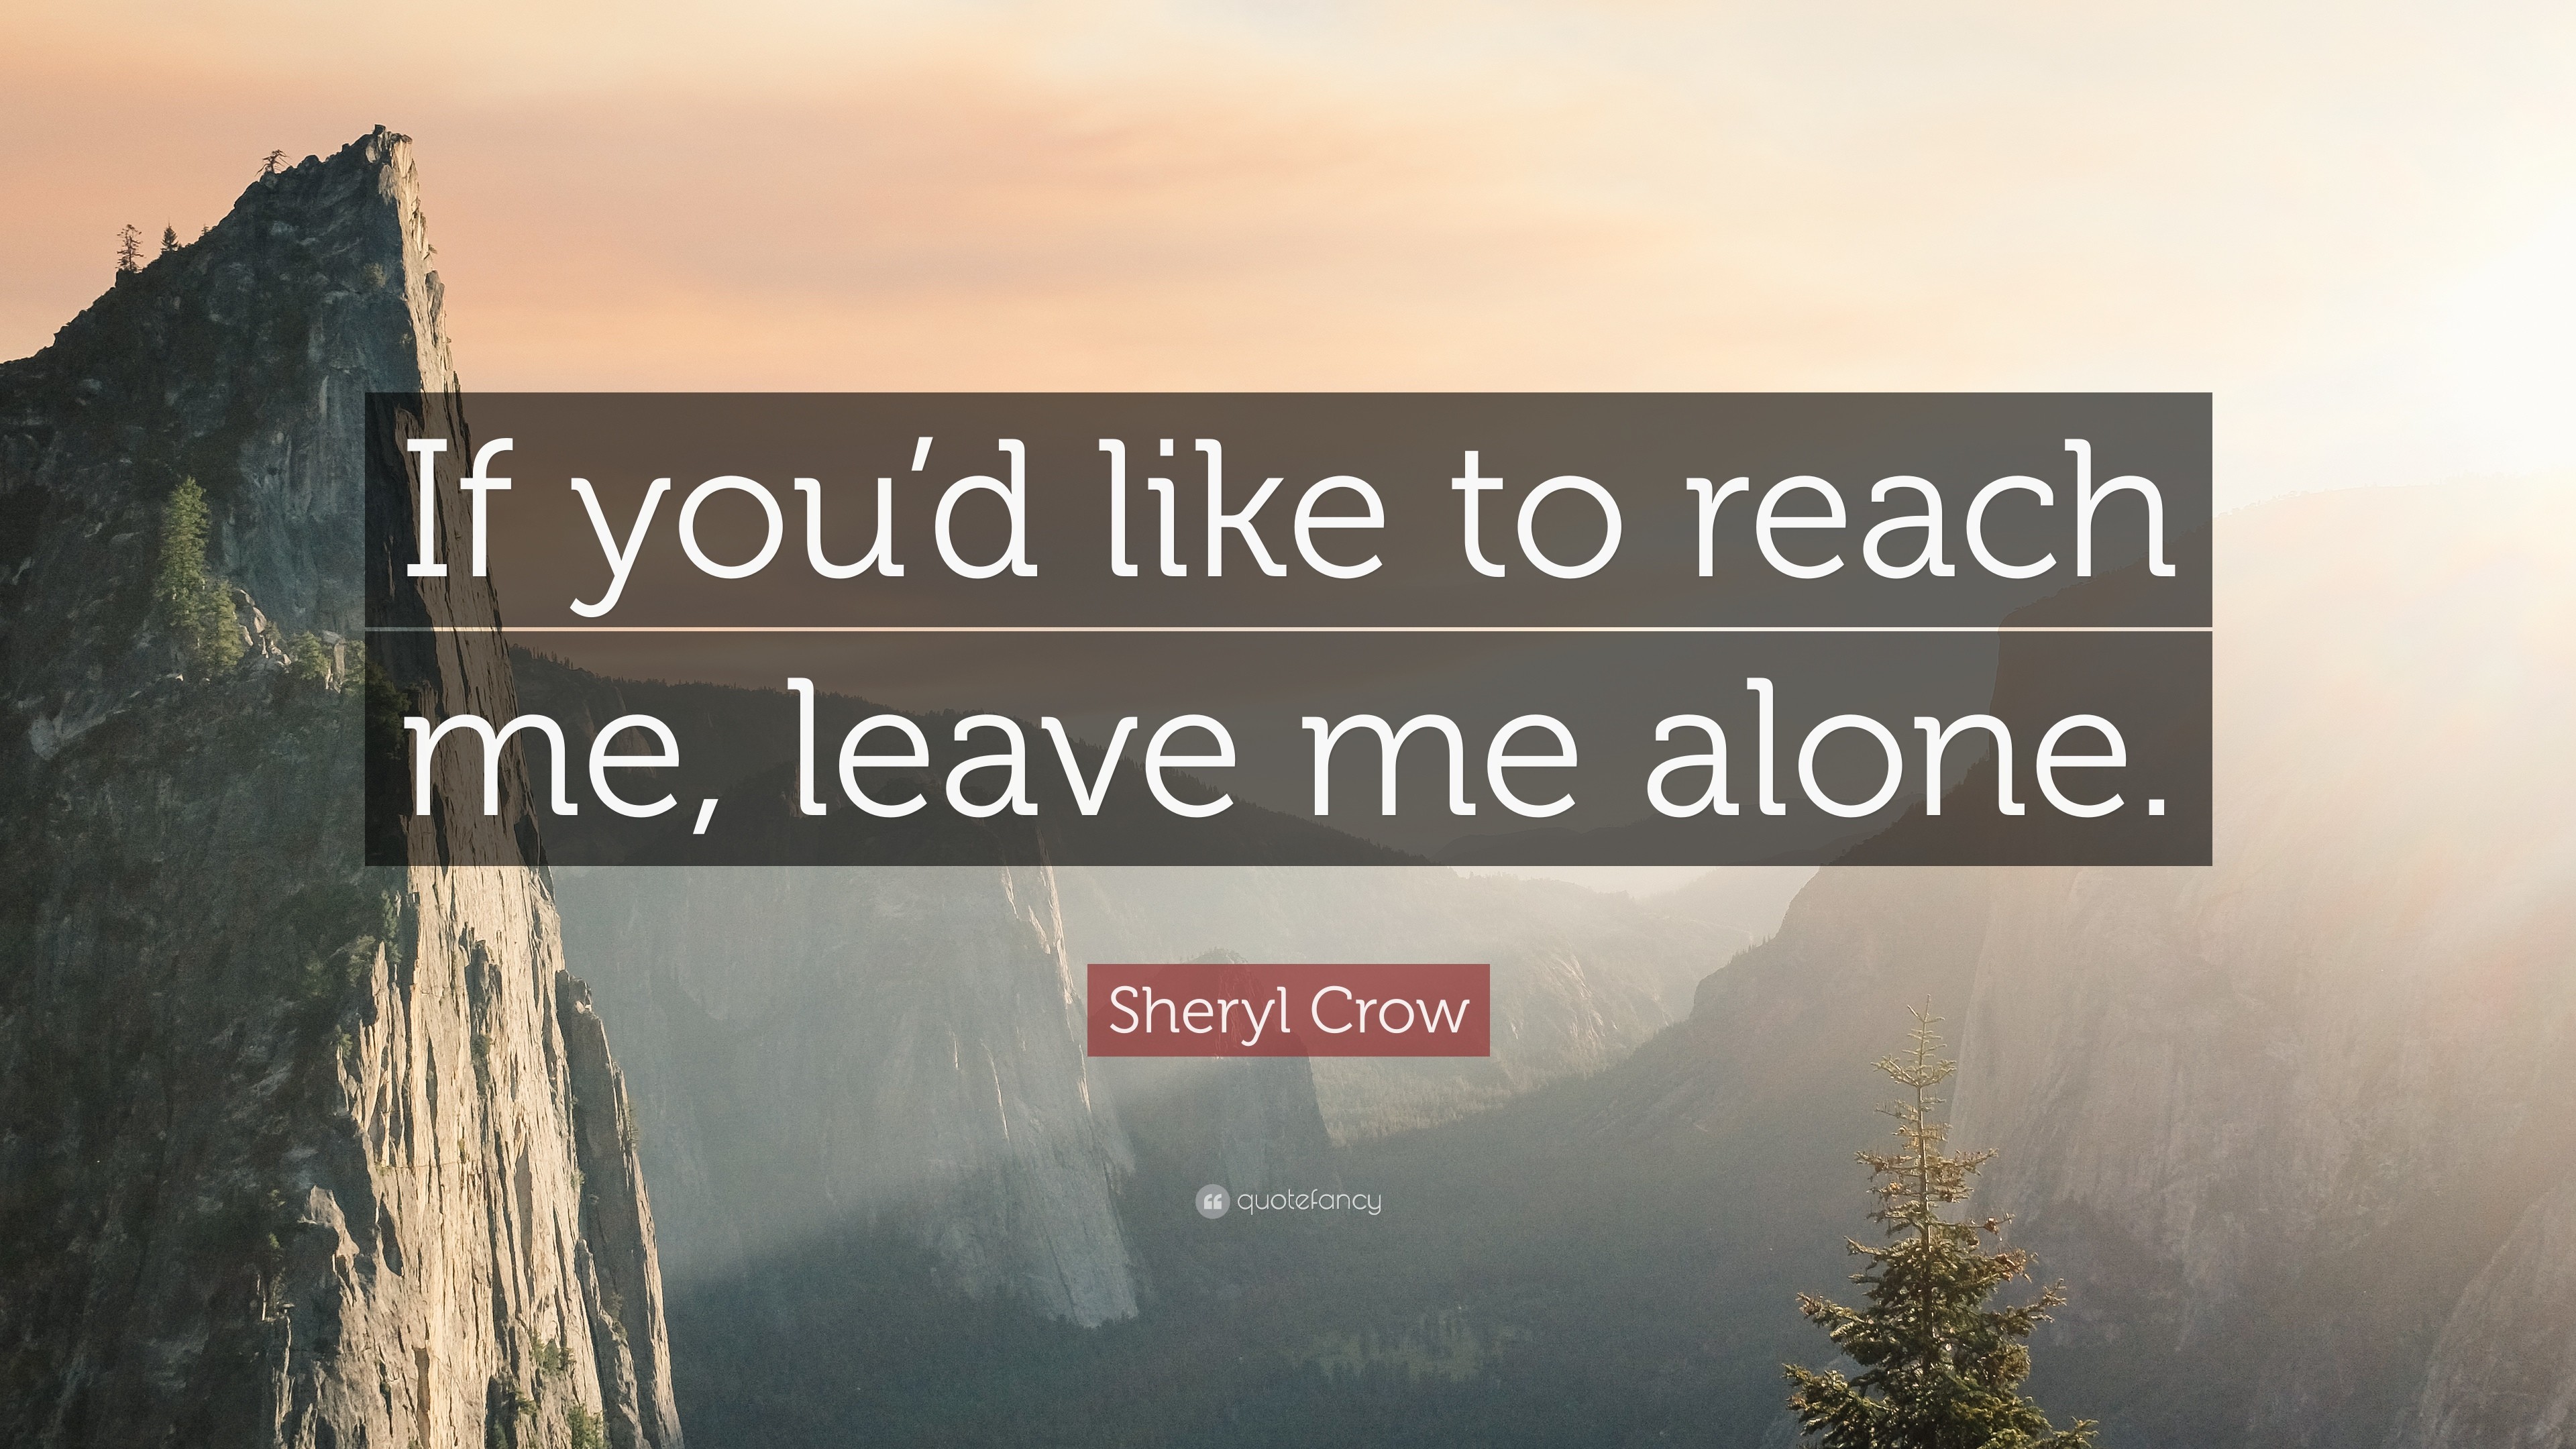 3840x2160 Sheryl Crow Quote: “If you'd like to reach me, leave me